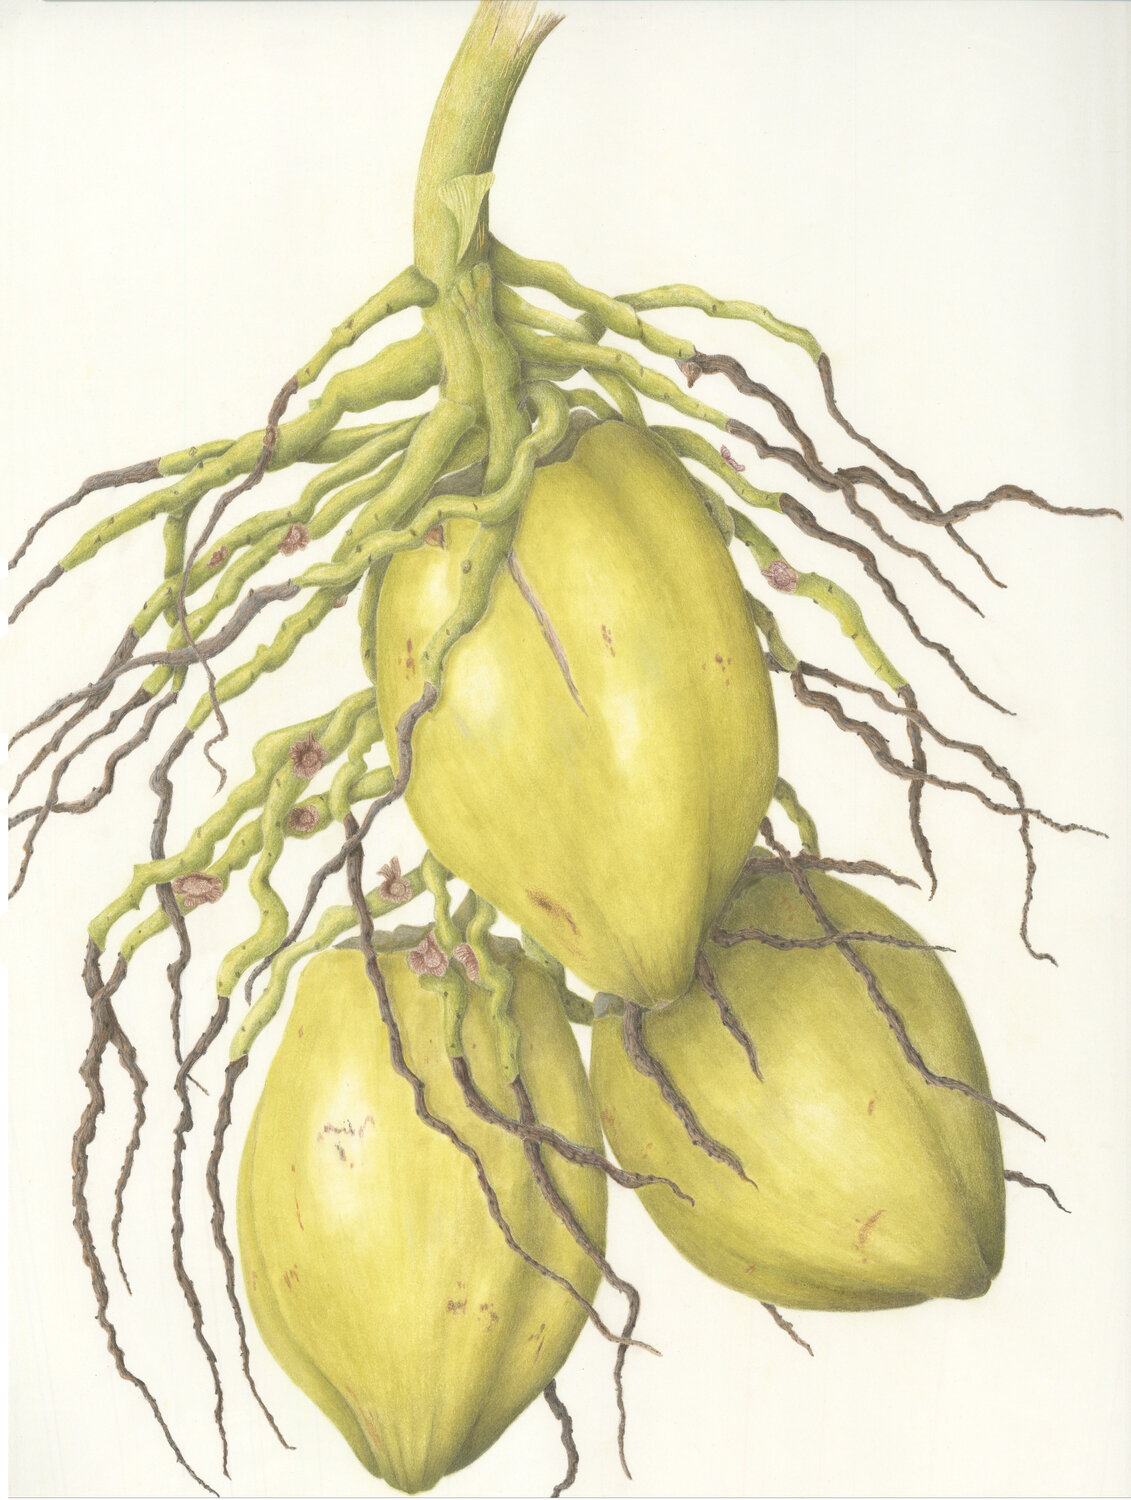 “Cocos nucifer, Water Coconut” by Judy M. Thomas. Thomas taught a colored pencil drawing class in August. It kicked off a series of botanical art programs offered in the coming months at Adkins Arboretum.